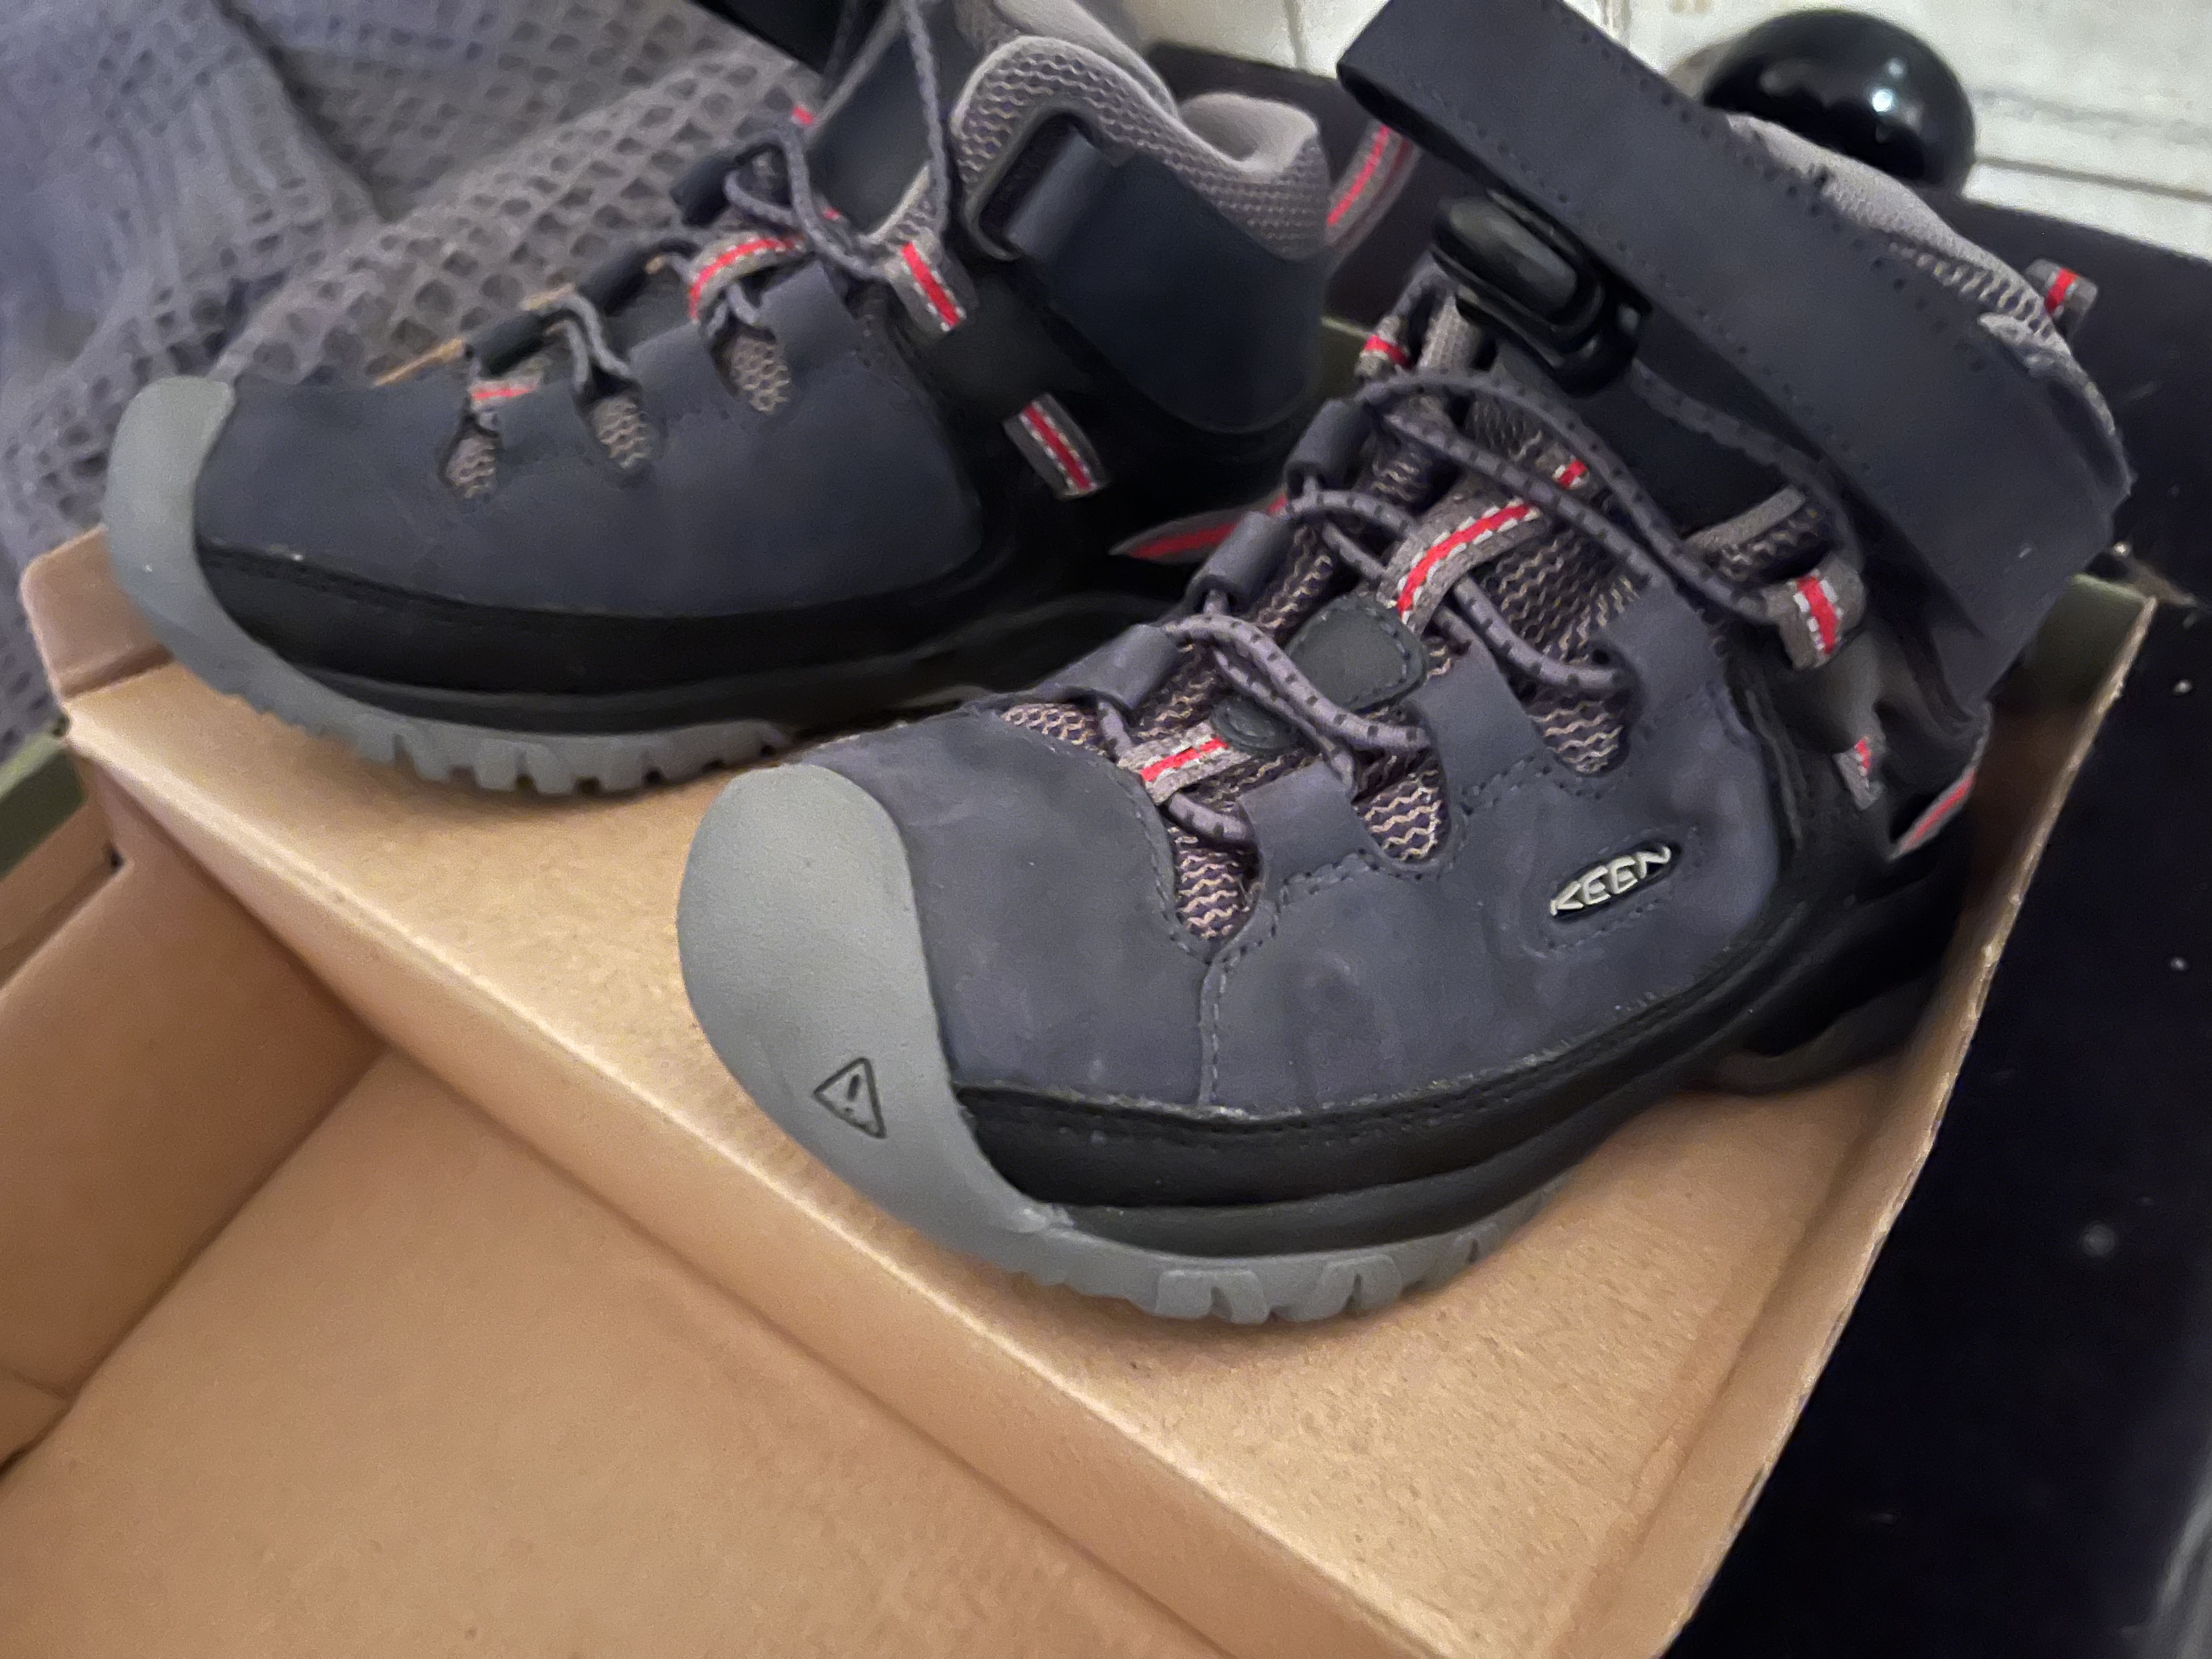 First look: Keen NXIS EVO WP Mid lightweight hiking boot review | LFTO